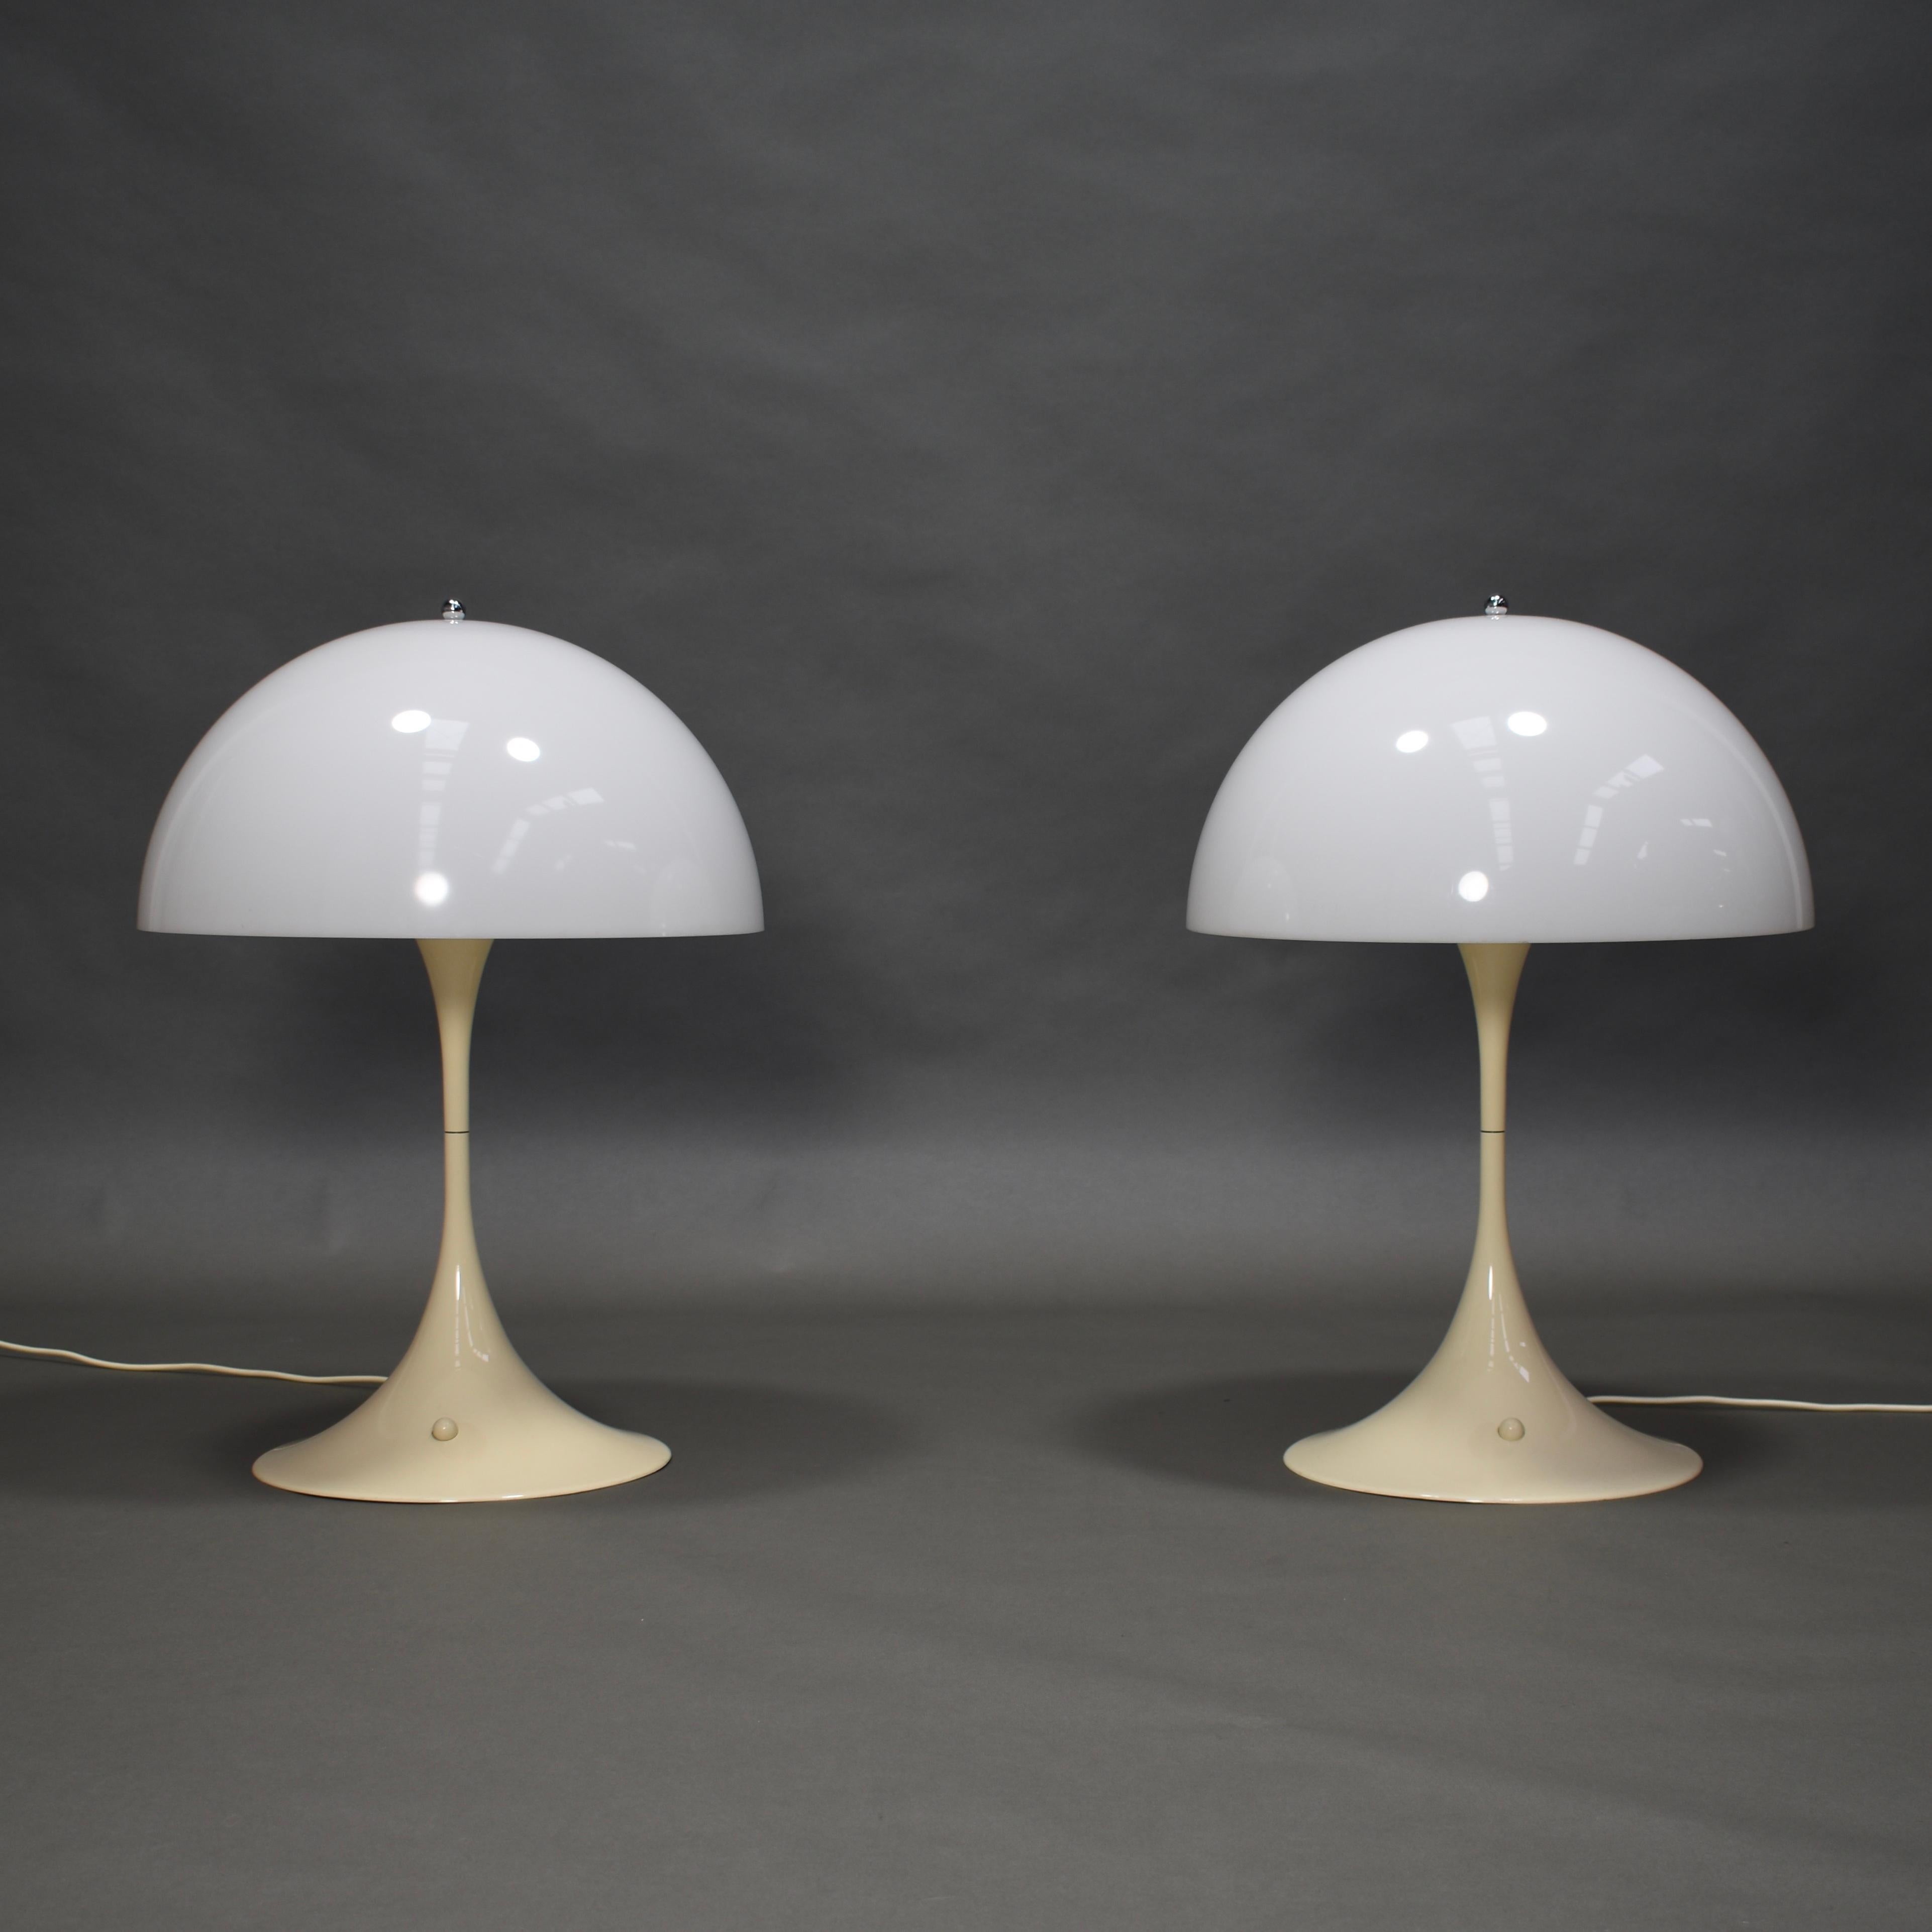 Pair of 1st edition Panthella table lamps by Verner Panton for Louis Poulsen, Denmark, 1971.

Designer: Verner Panton

Manufacturer: Louis Poulsen

Country: Denmark

Model: Panthella table lamp (large) Type 23430 1st edition